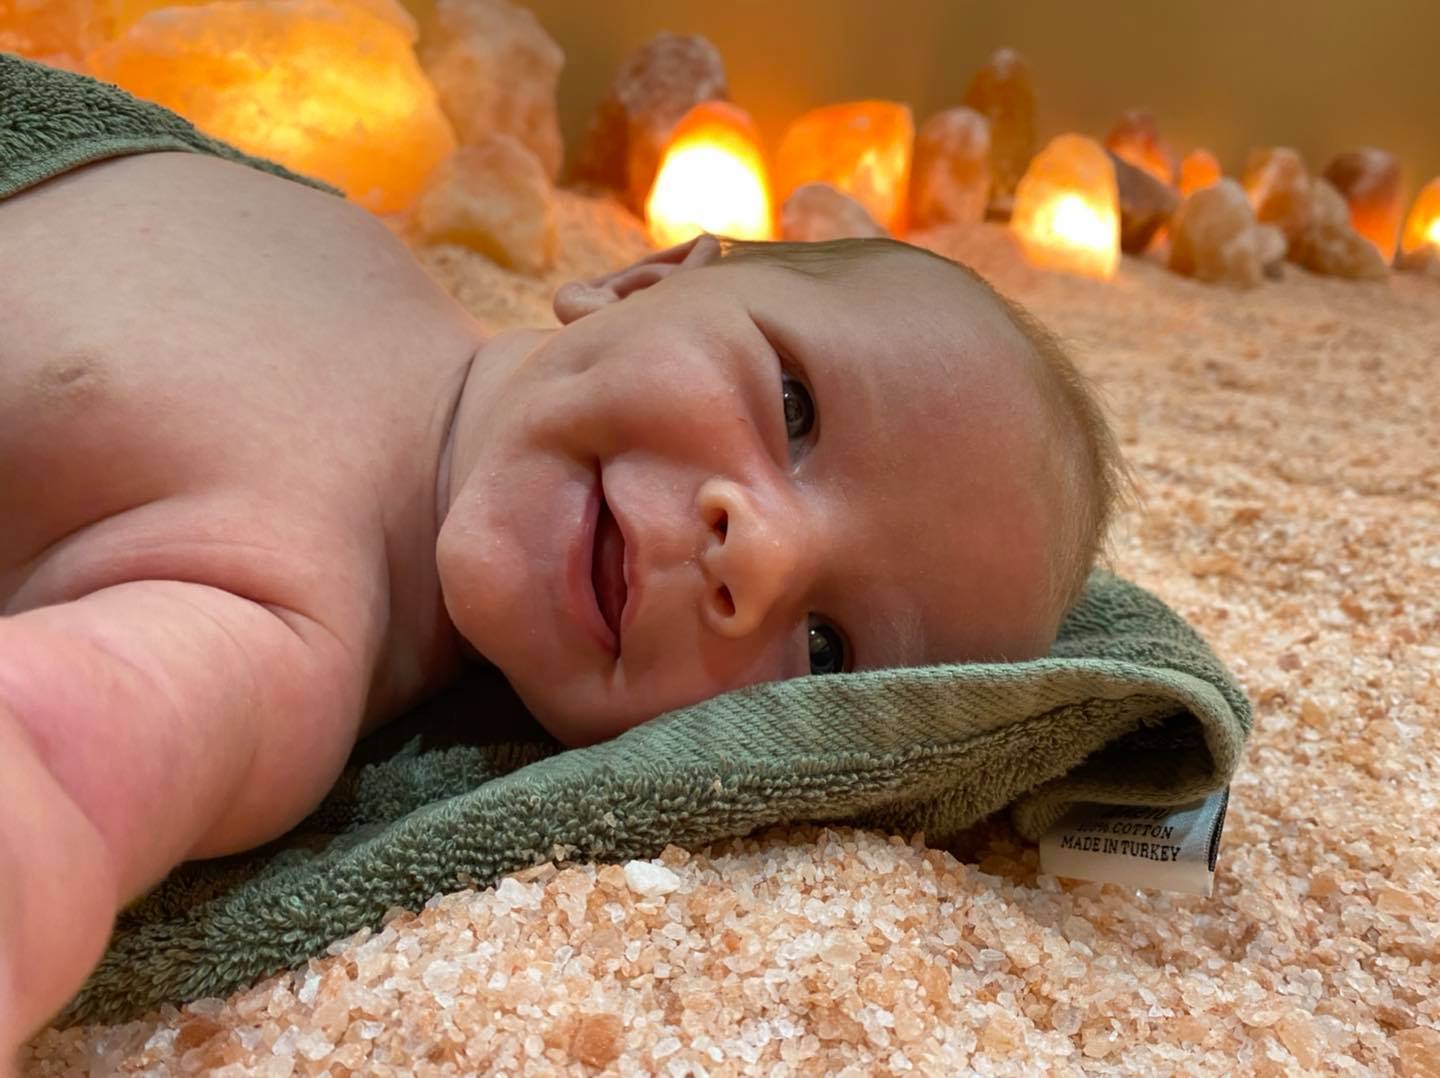 A smiling baby laying on a green towel on a salt covered floor with salt rock lamps in the background.